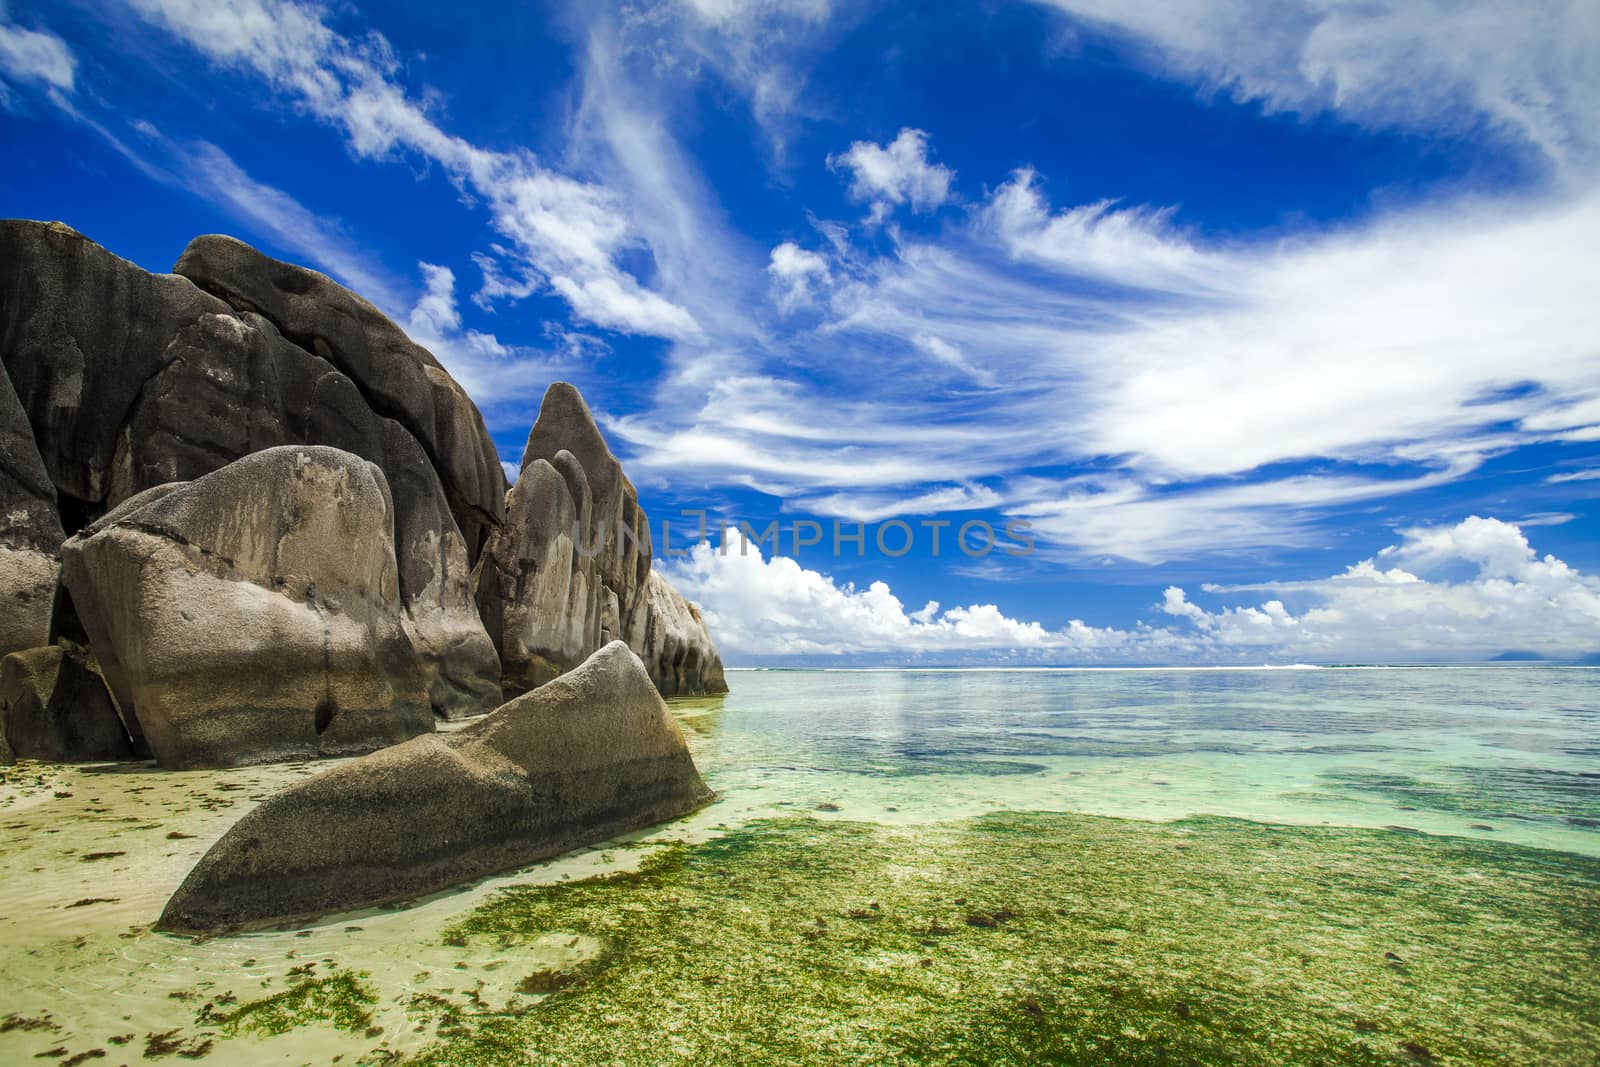 The beautiful Anse Source D'Argent beach in La Digue Island, Seychelles